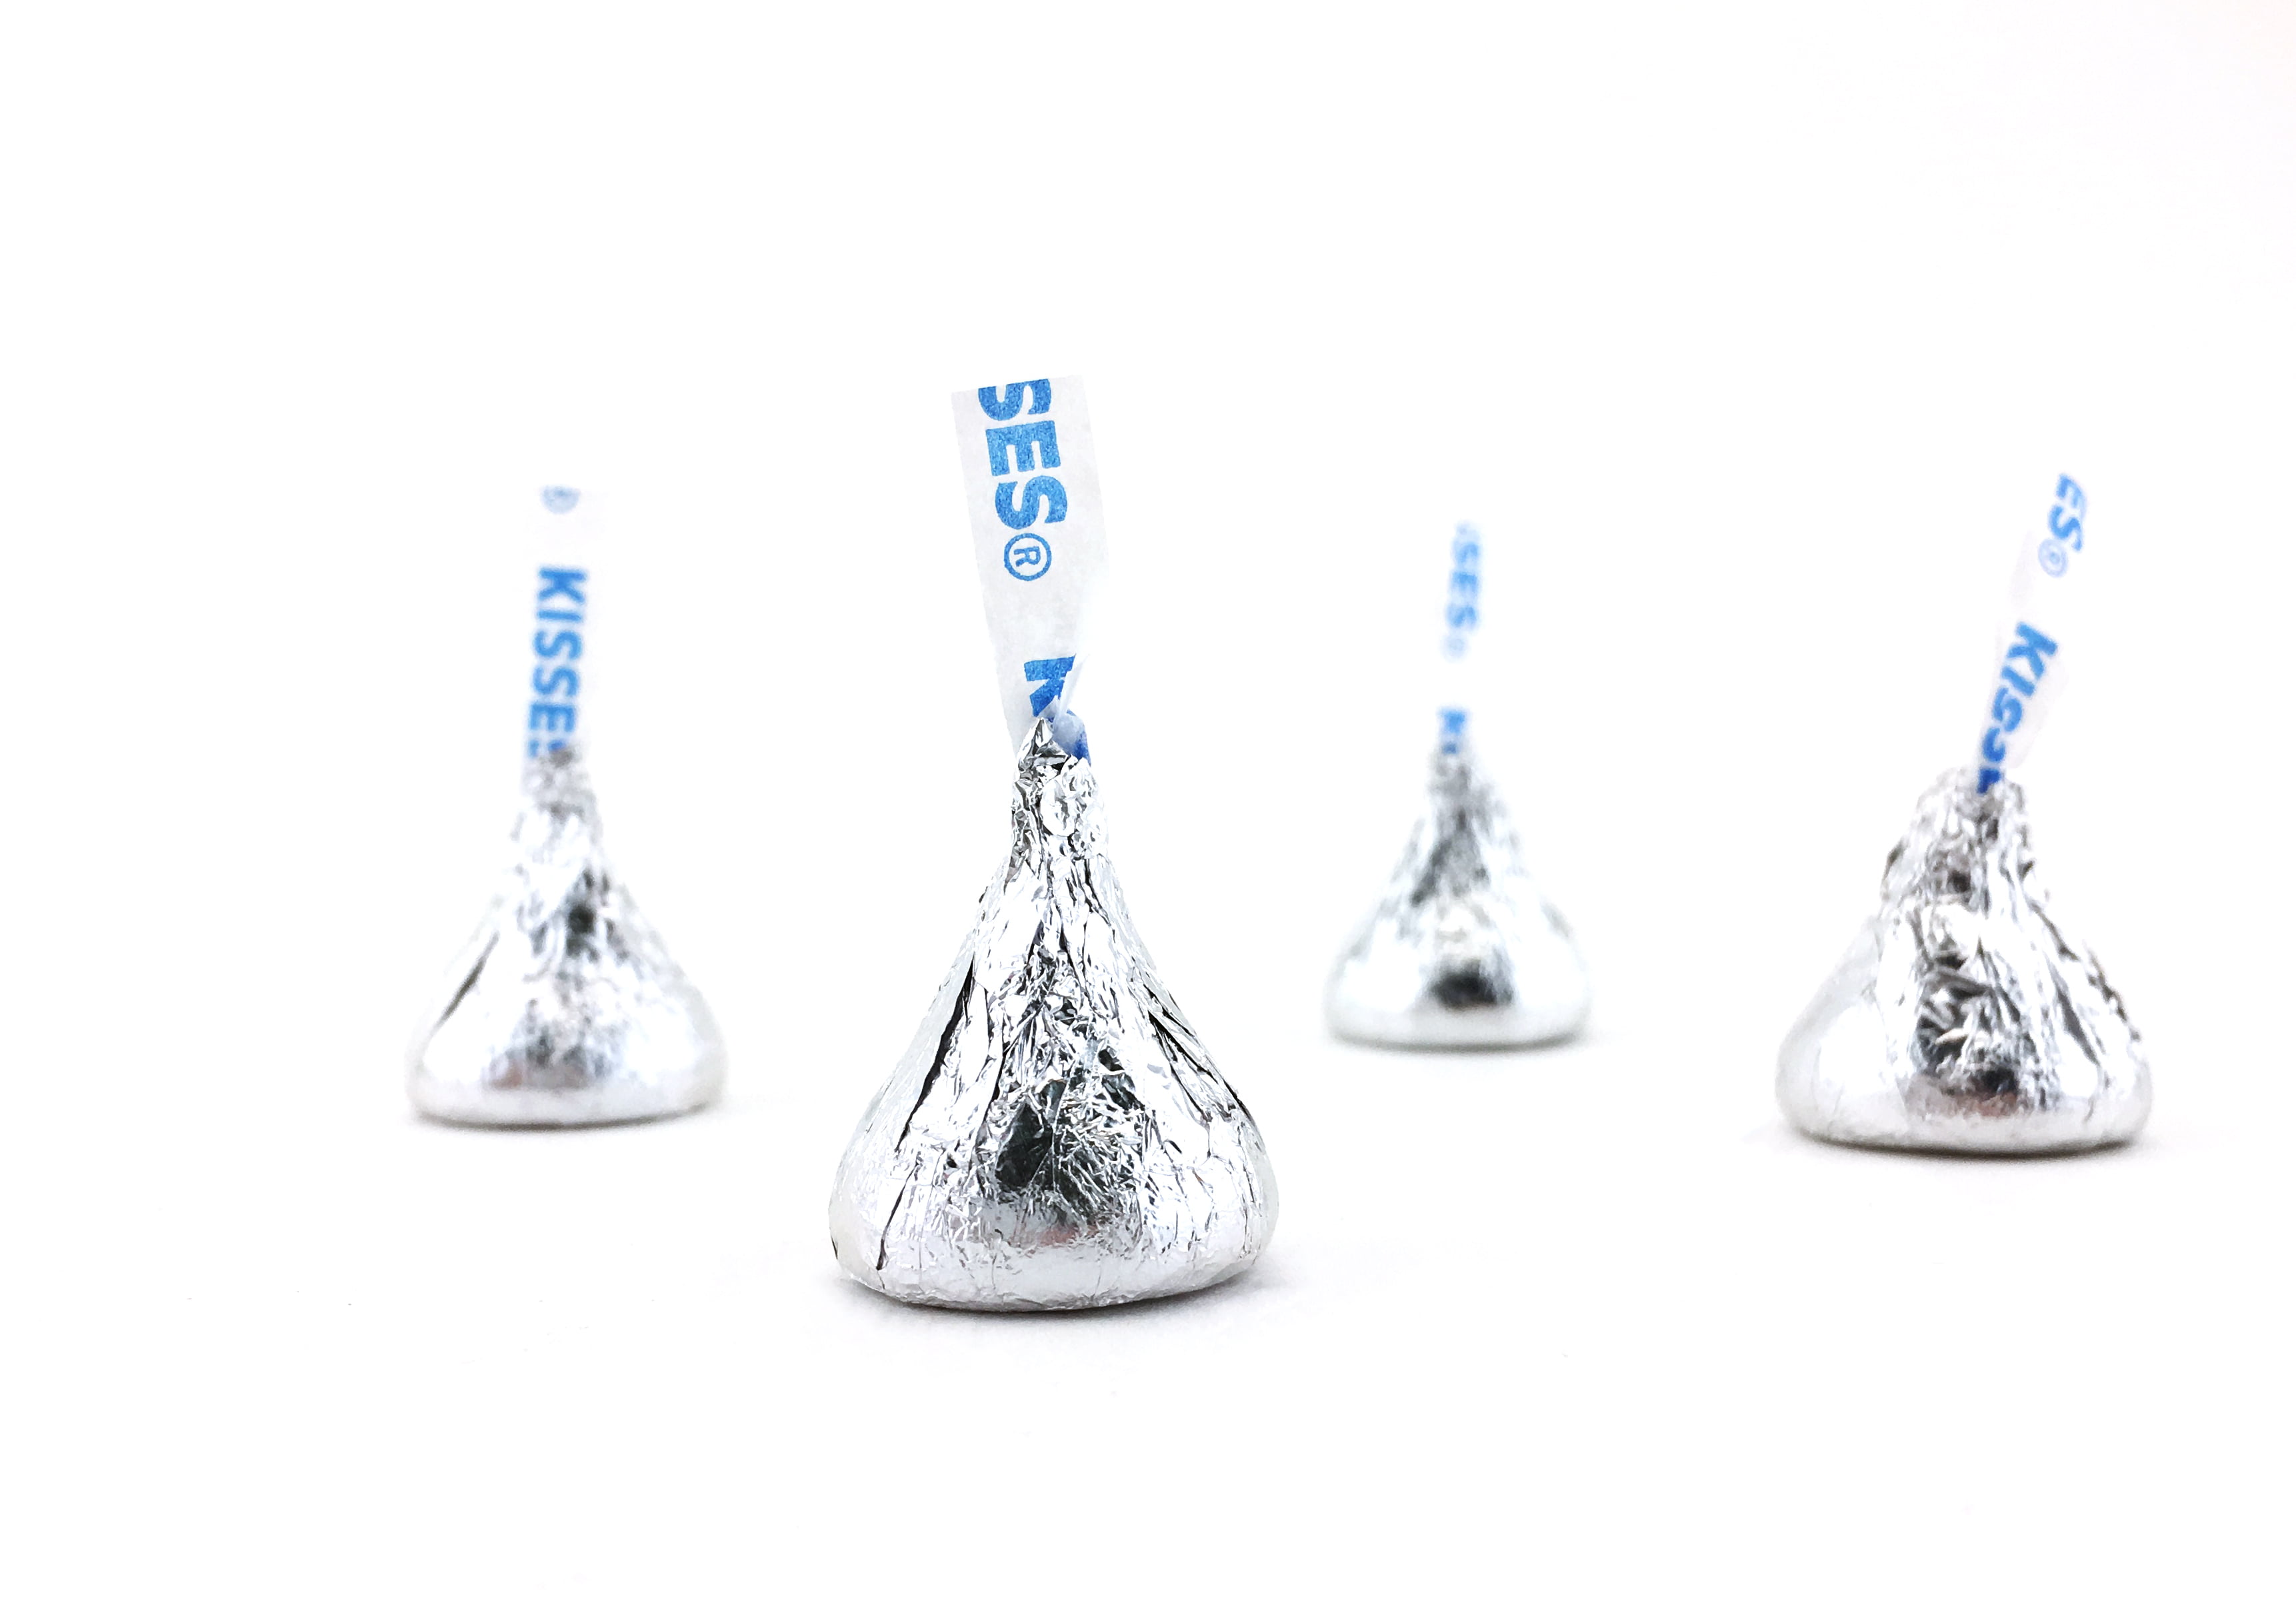 Milk Chocolate in Silver Foil Hershey's Kisses Pack of 6 Pounds 